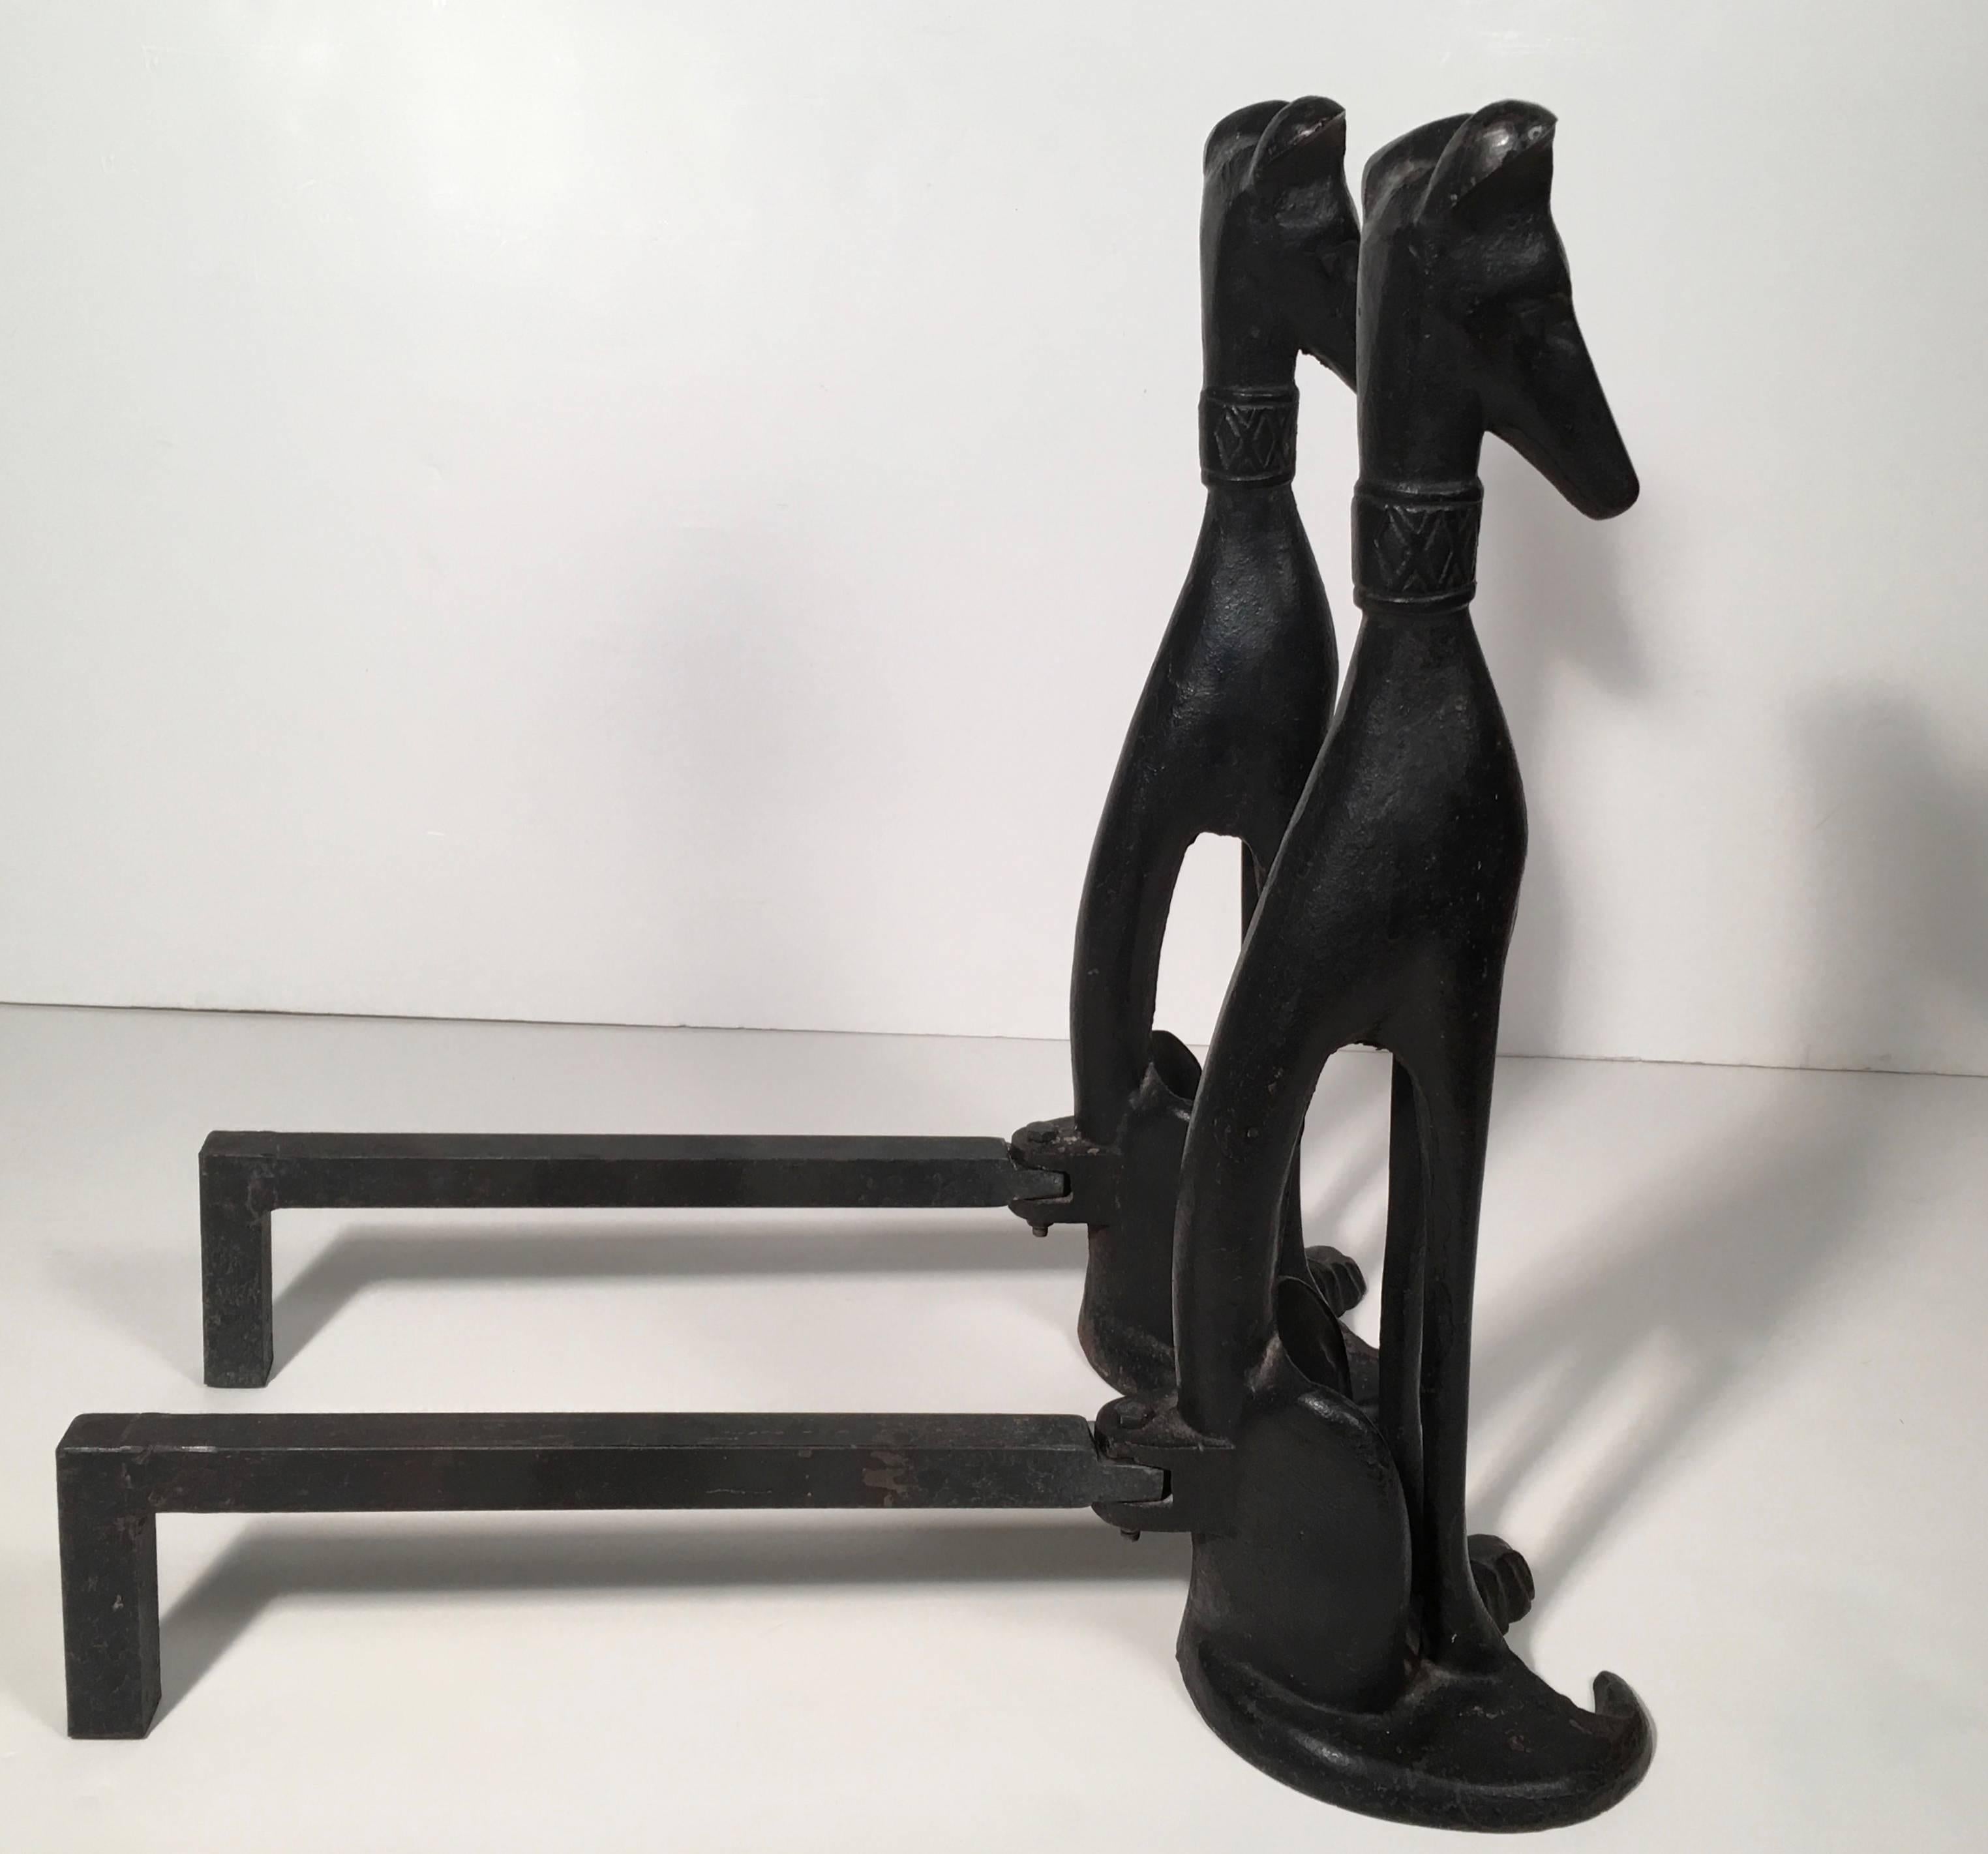 A wonderful pair of Mid-Century, artist made, wrought iron figural dog andirons, each one depicting an alert, stylized dog (whippets or greyhounds, perhaps), with decorative collars, sitting on their haunches, signed 